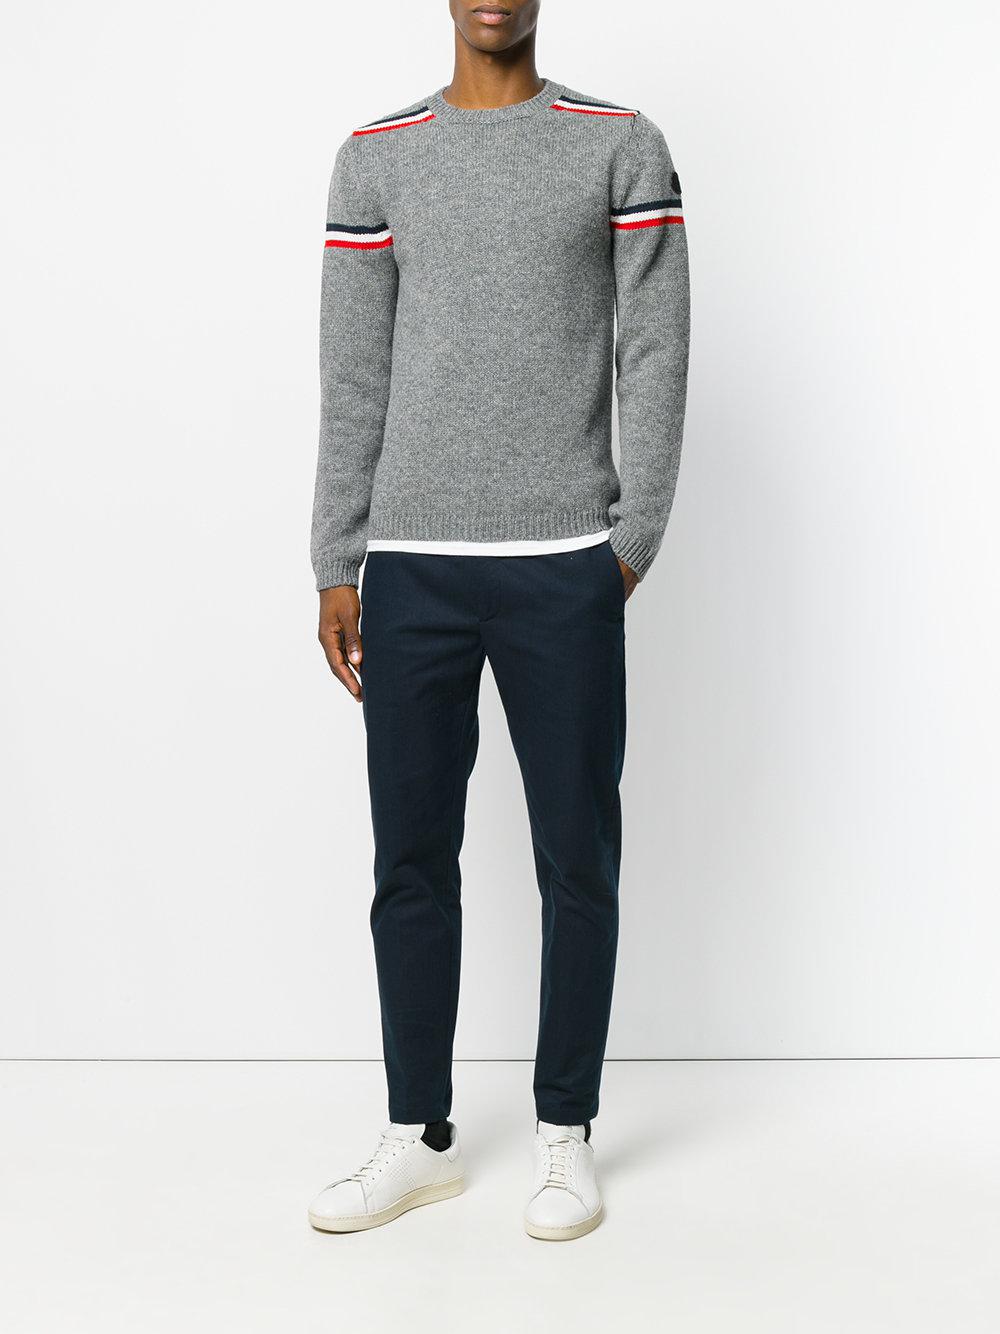 Lyst - Moncler Logo Striped Sweater in Gray for Men